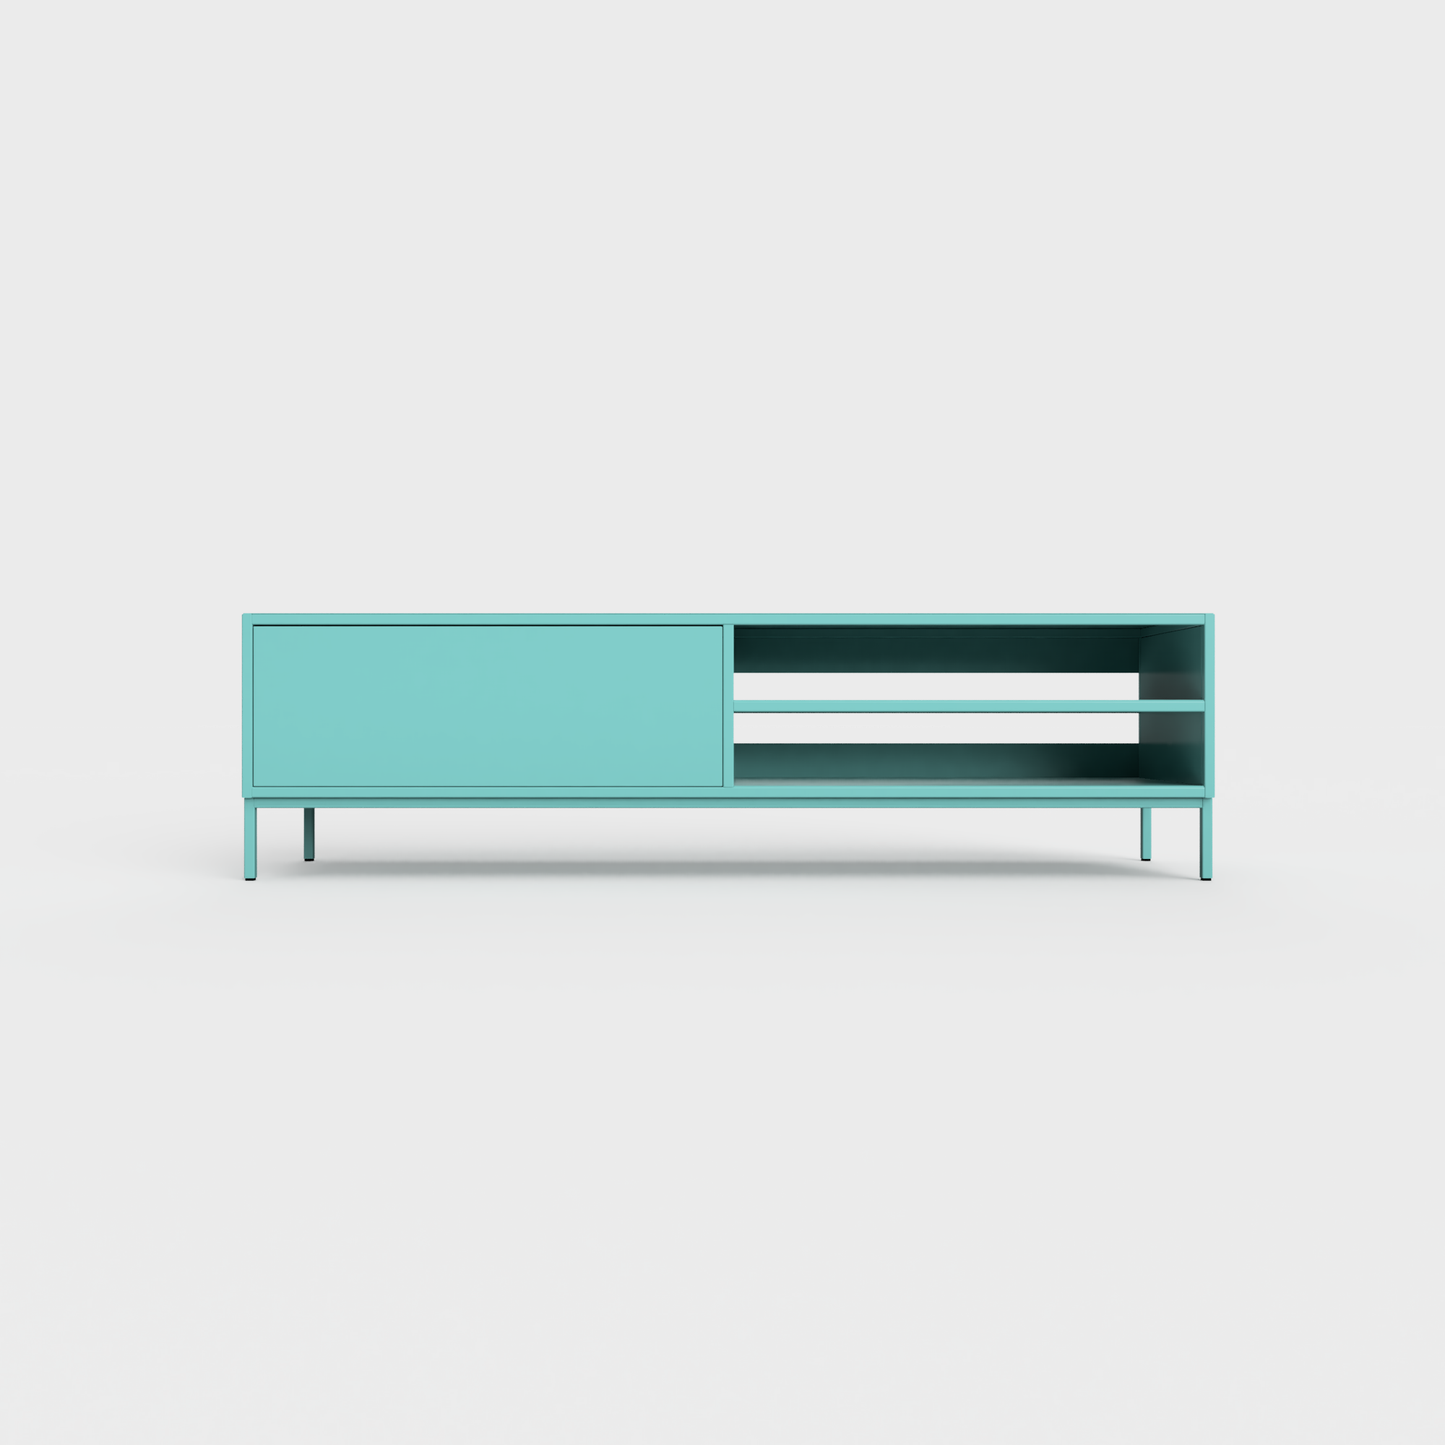 Prunus 02 Lowboard in Forget me not color, powder-coated steel, elegant and modern piece of furniture for your living room